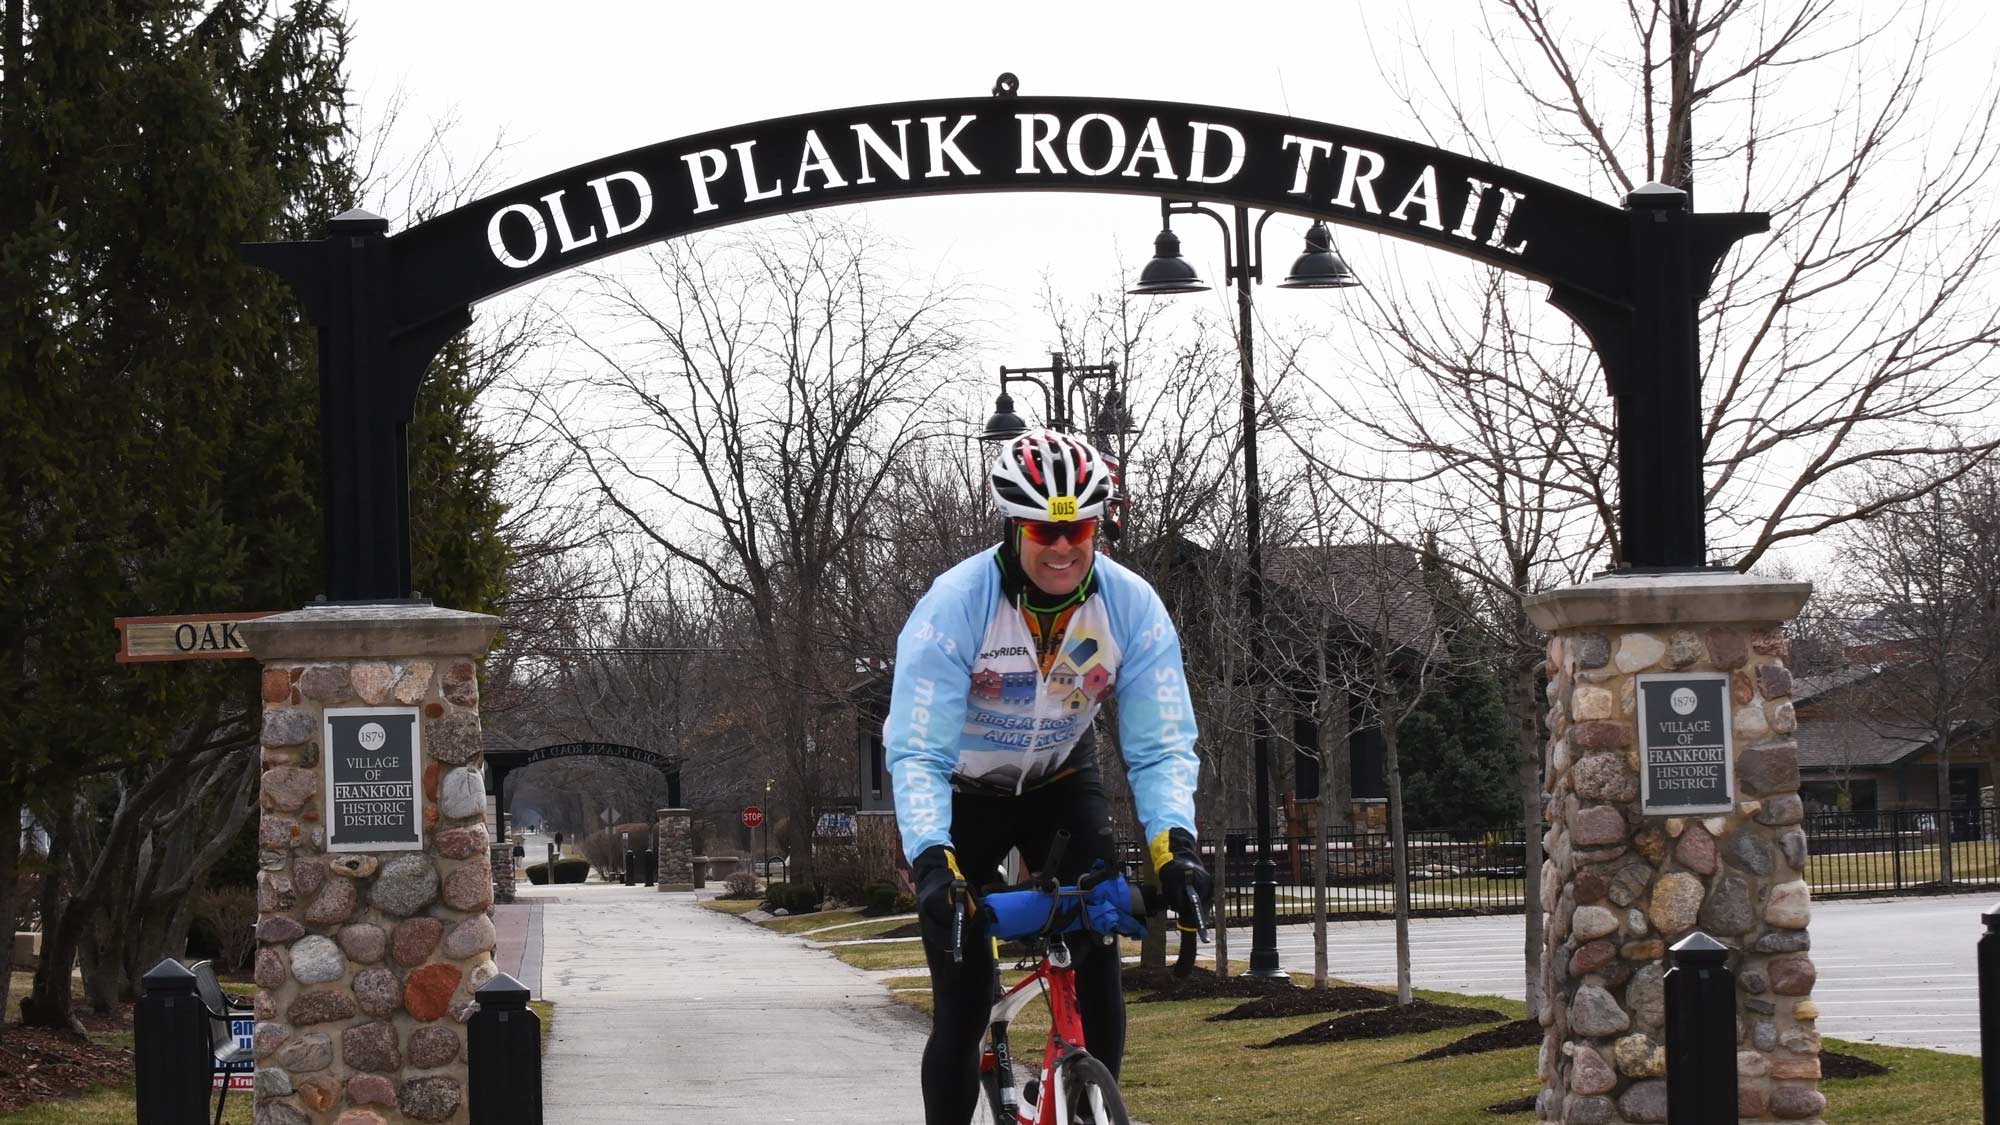 A bicyclist on the Old Plank Road Trail.